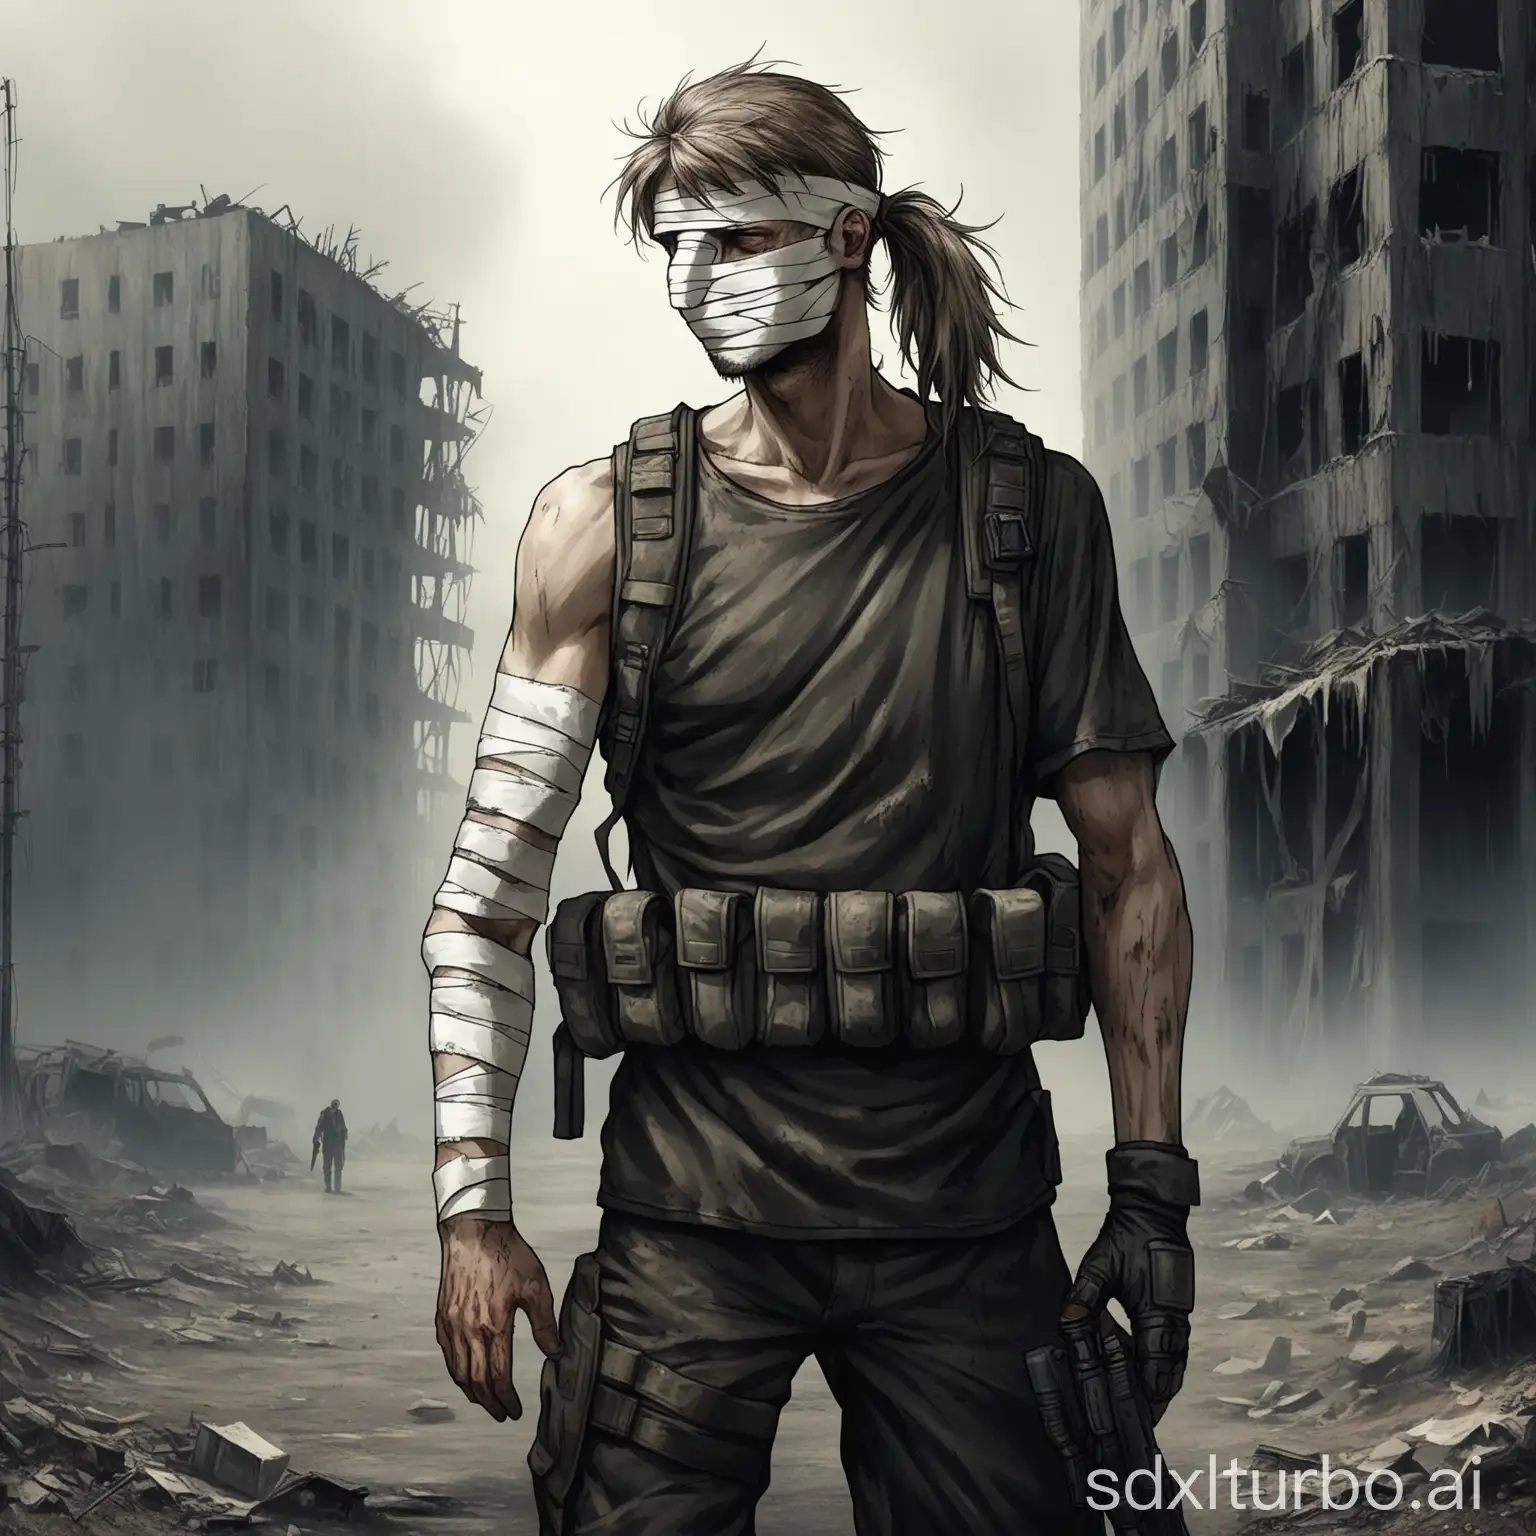 A full growth adult thin russian man in a post-apocalyptic setting. He has ponytail hair. His right arm is full bandaged from the hand to the shoulder. The lower part of face is wrapped in bandages, leaving his eyes and nose visible. He wears dark official shirt and tactical gear